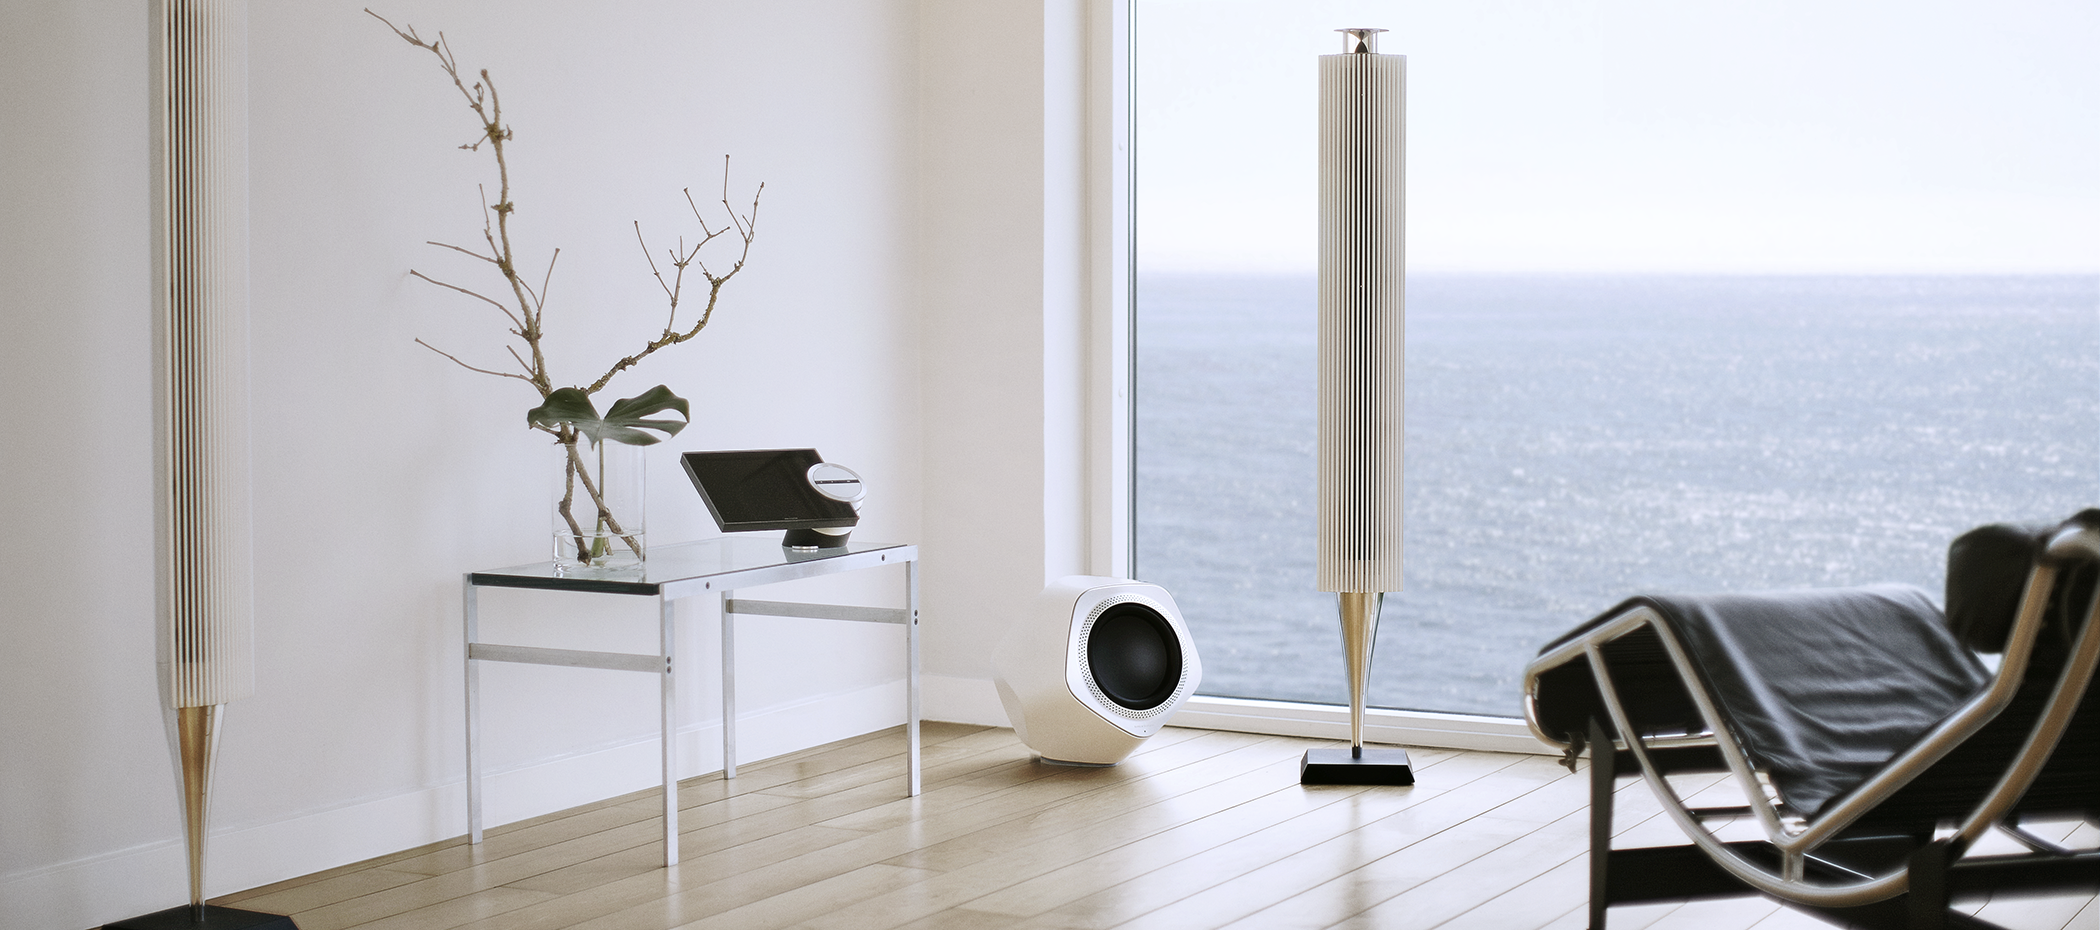 Bang & Olufsen Beolab 19 Lifestyle picture with Beolab 18